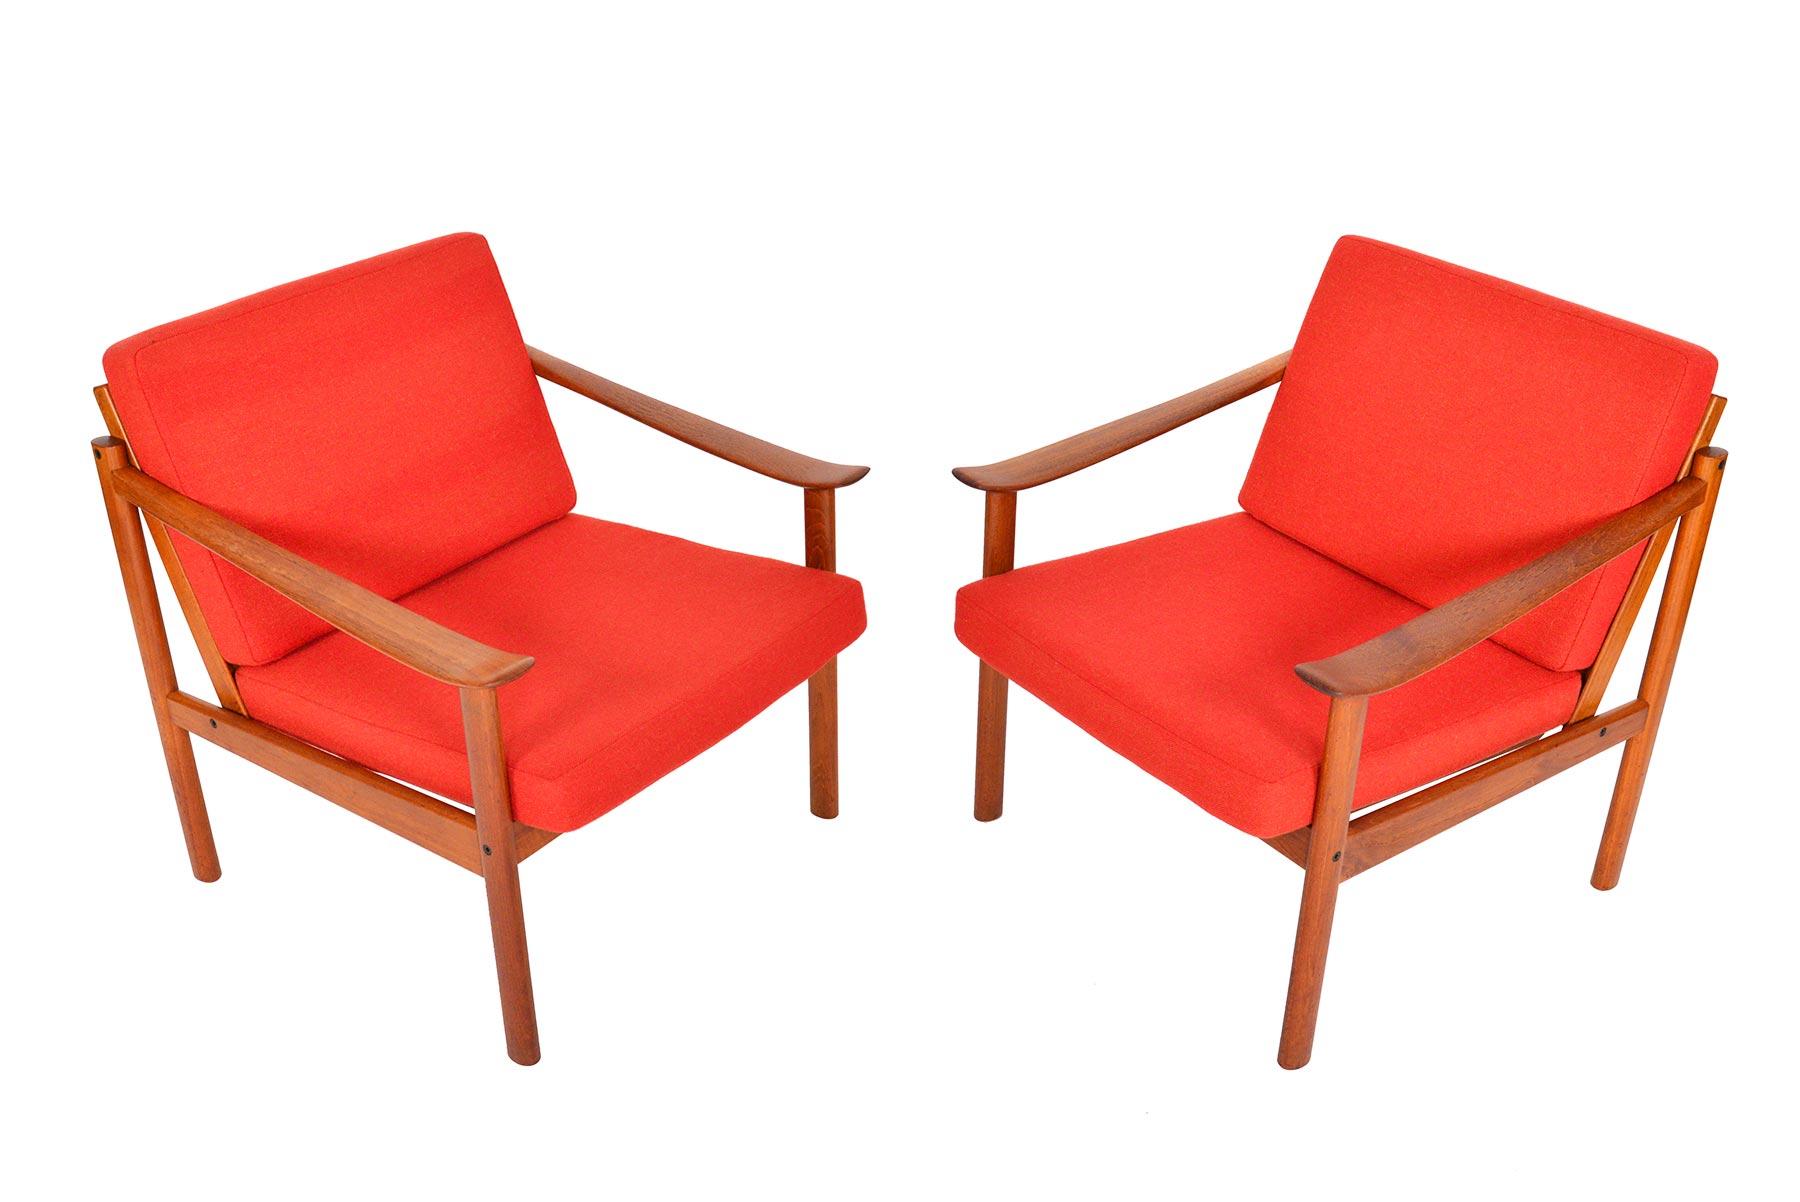 This beautifully sculpted pair of teak lounge chairs was designed by Kai Lyngfeldt Larsen for Søborg Møbelfabrik in the 1960s. Expertly crafted, this pair will make the perfect addition to any modern home. Cascading arm forms offer an exceptional